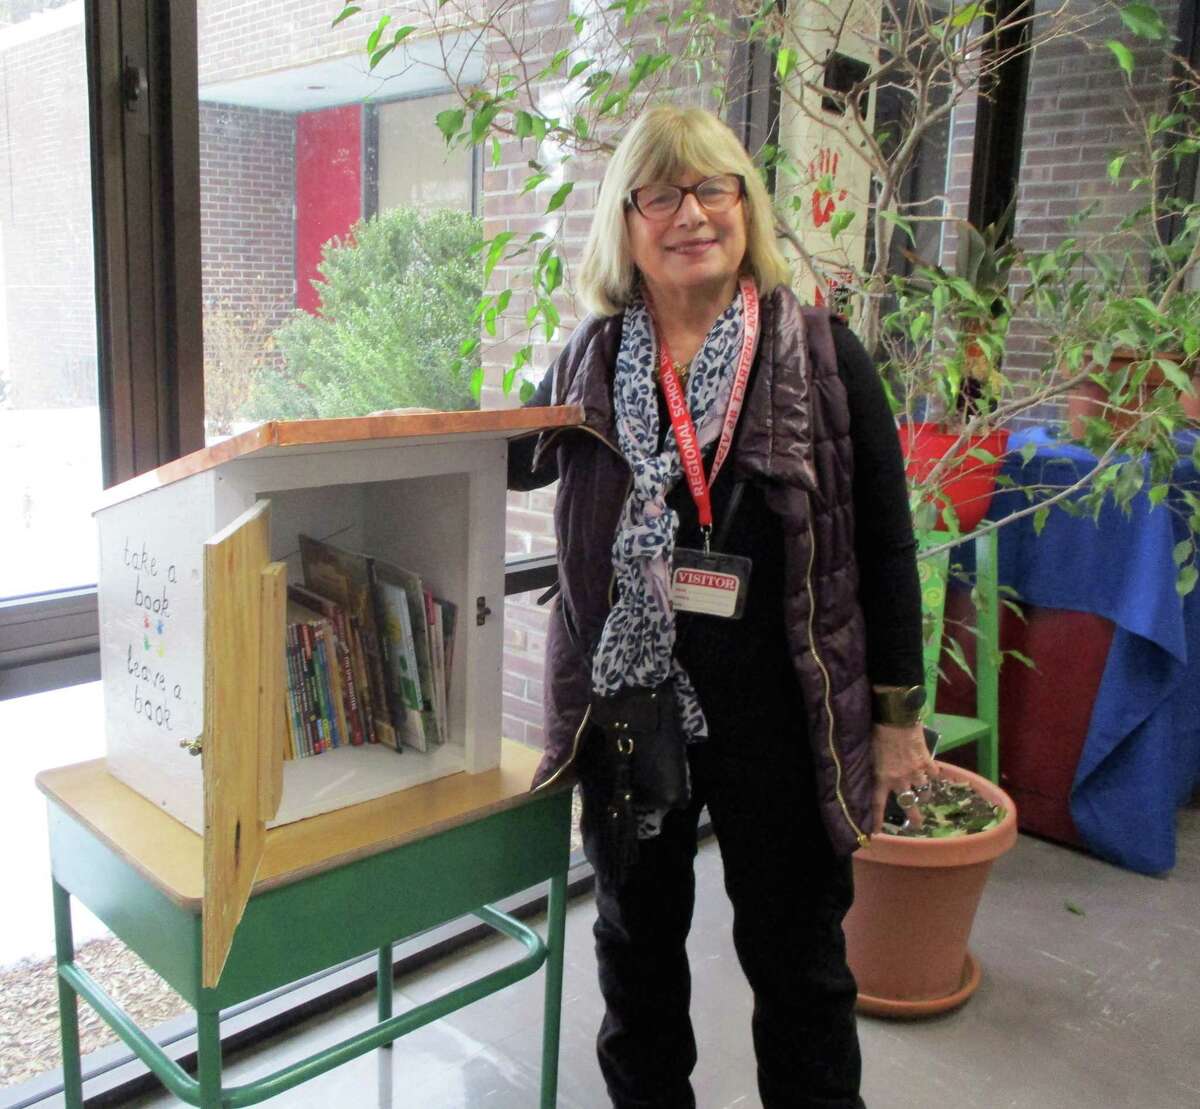 Rose Buckens, founder of Little Free Library at StoneHill, made sure the new box was filled with children’s books.